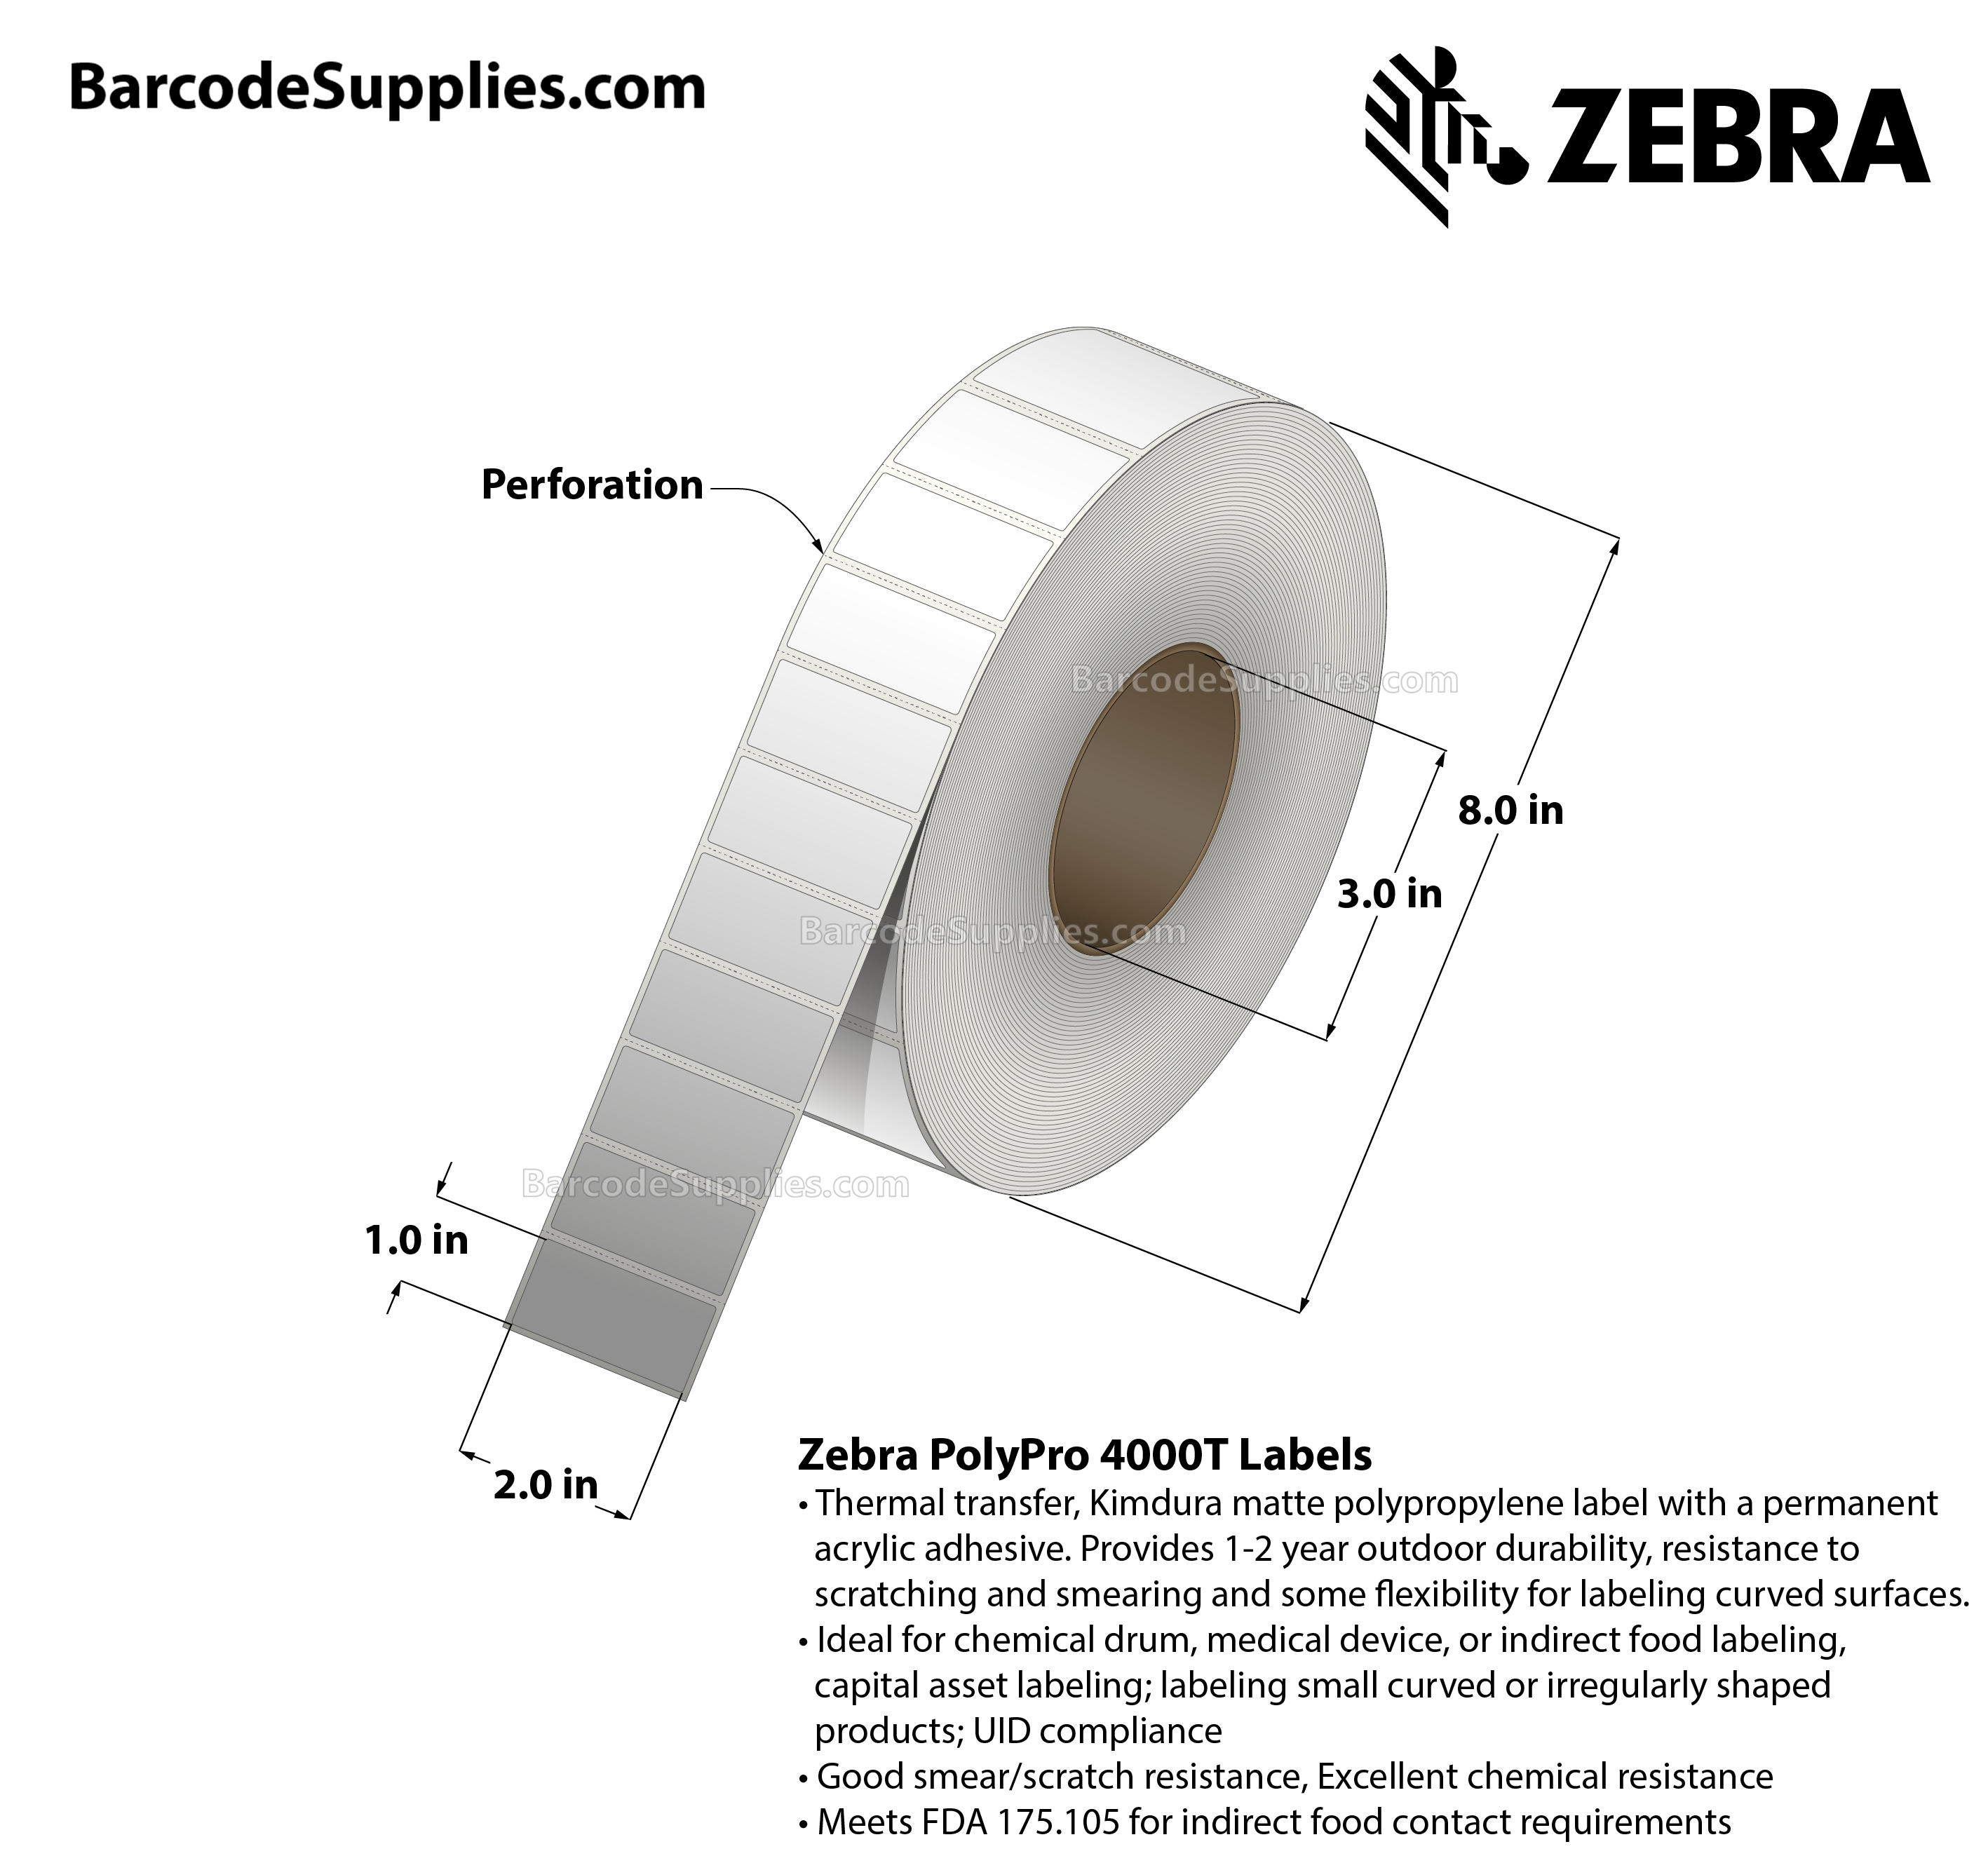 2 x 1 Thermal Transfer White PolyPro 4000T Labels With Permanent Adhesive - Perforated - 3940 Labels Per Roll - Carton Of 4 Rolls - 15760 Labels Total - MPN: 10014716